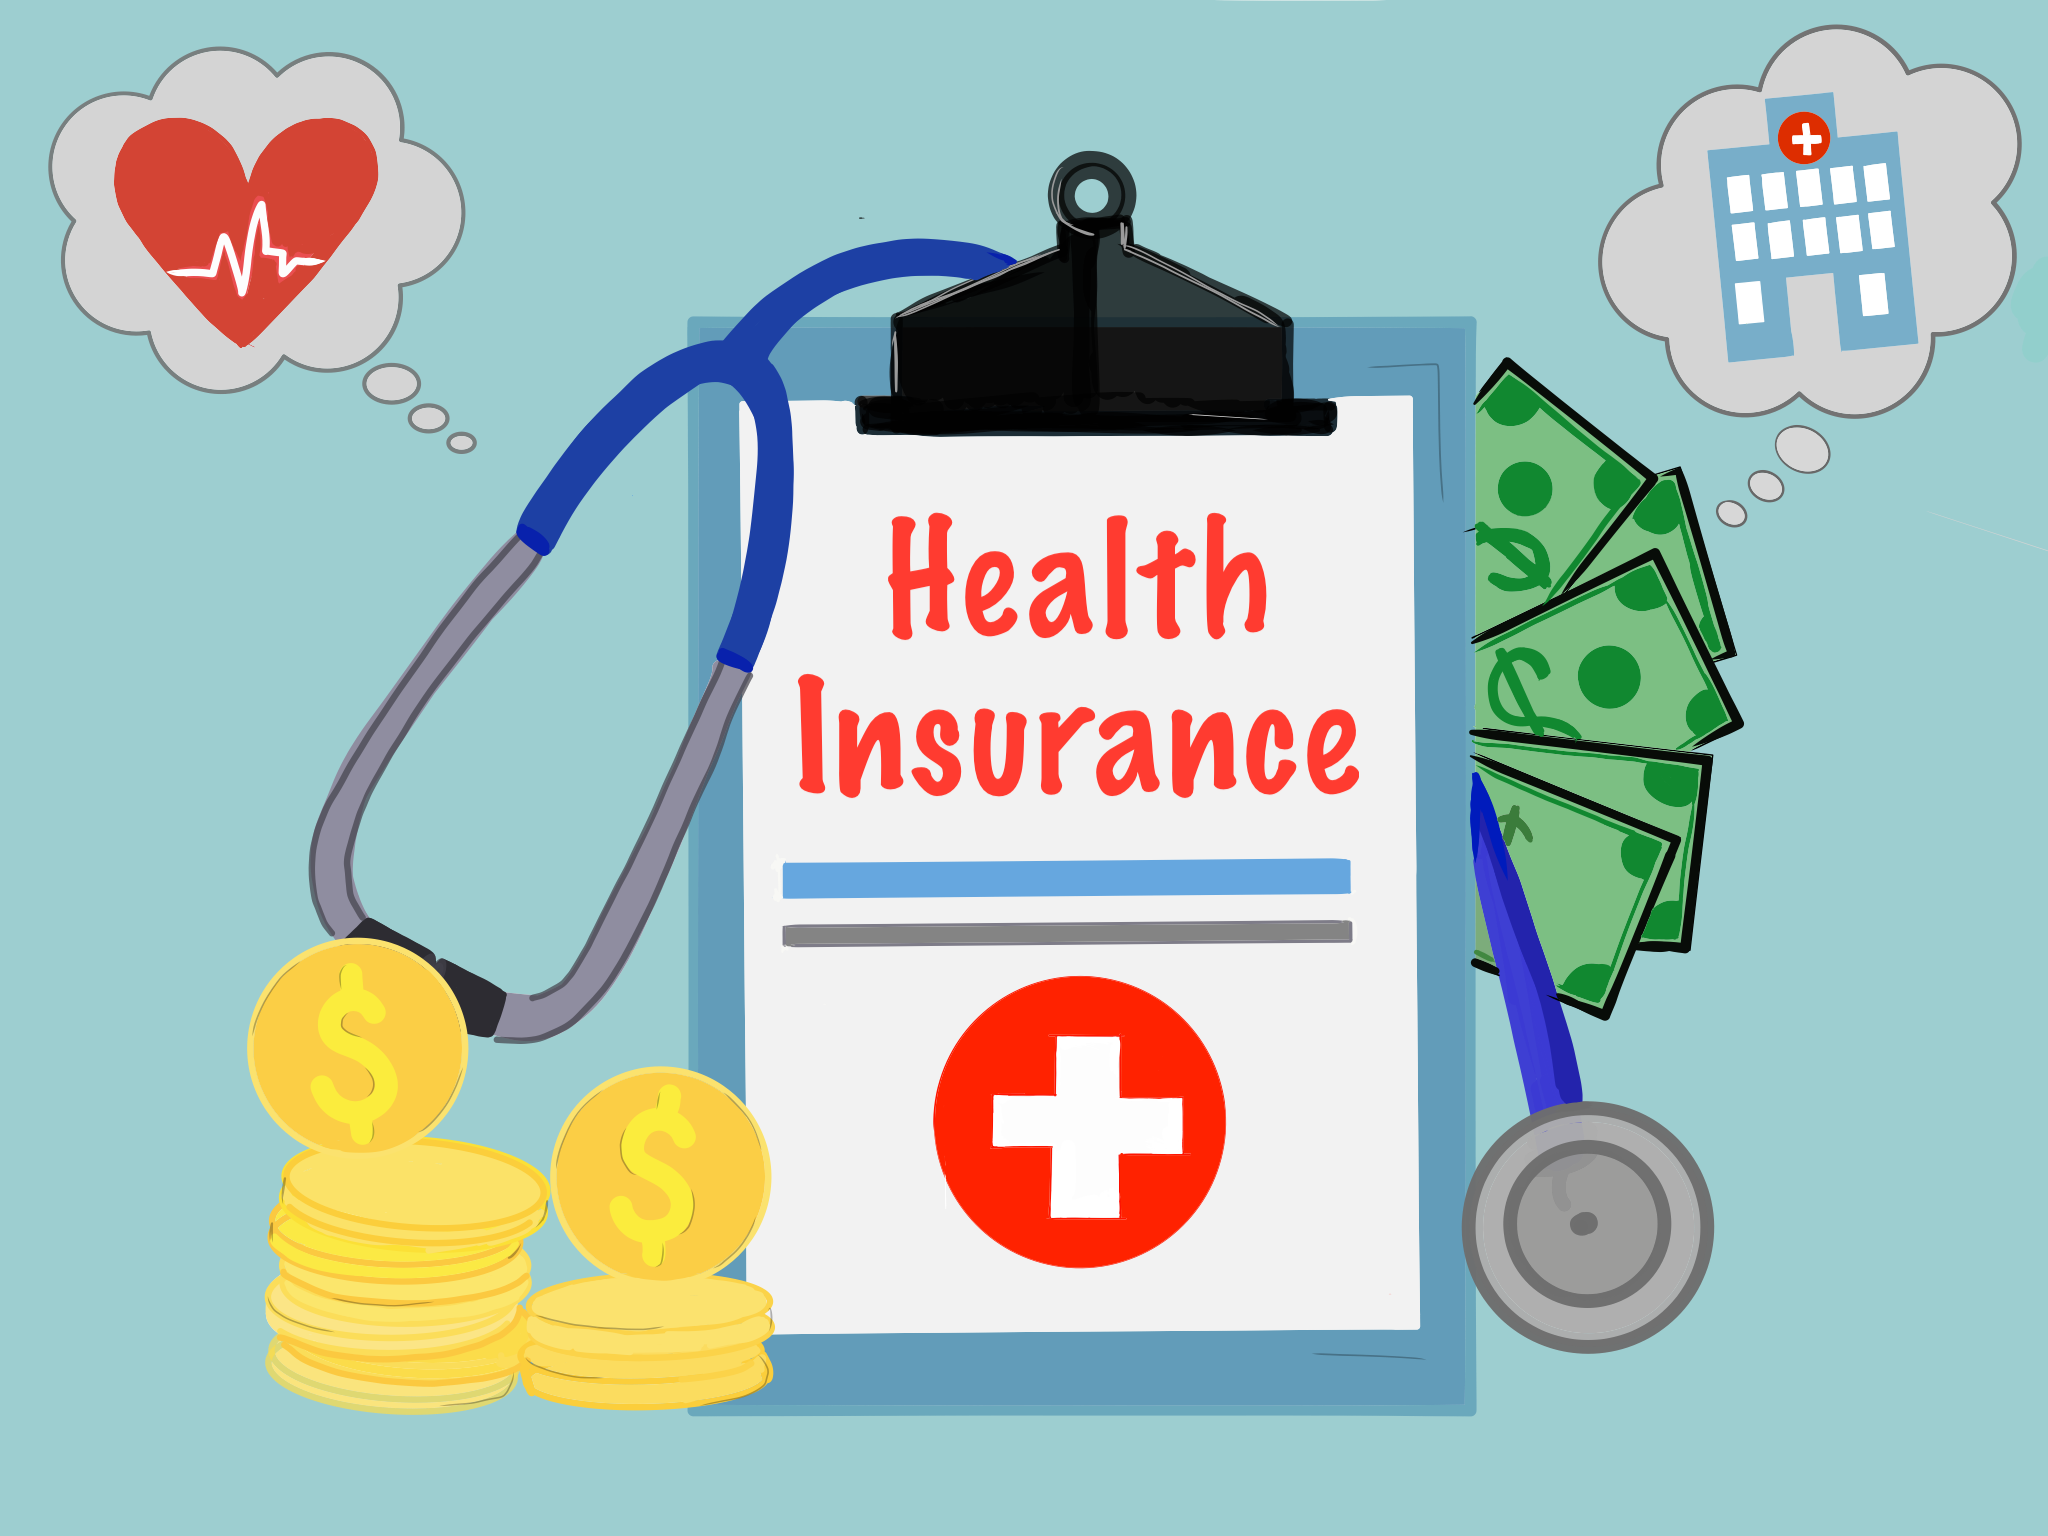 5 Questions You Must Ask Before Selecting A Health Insurance Provider